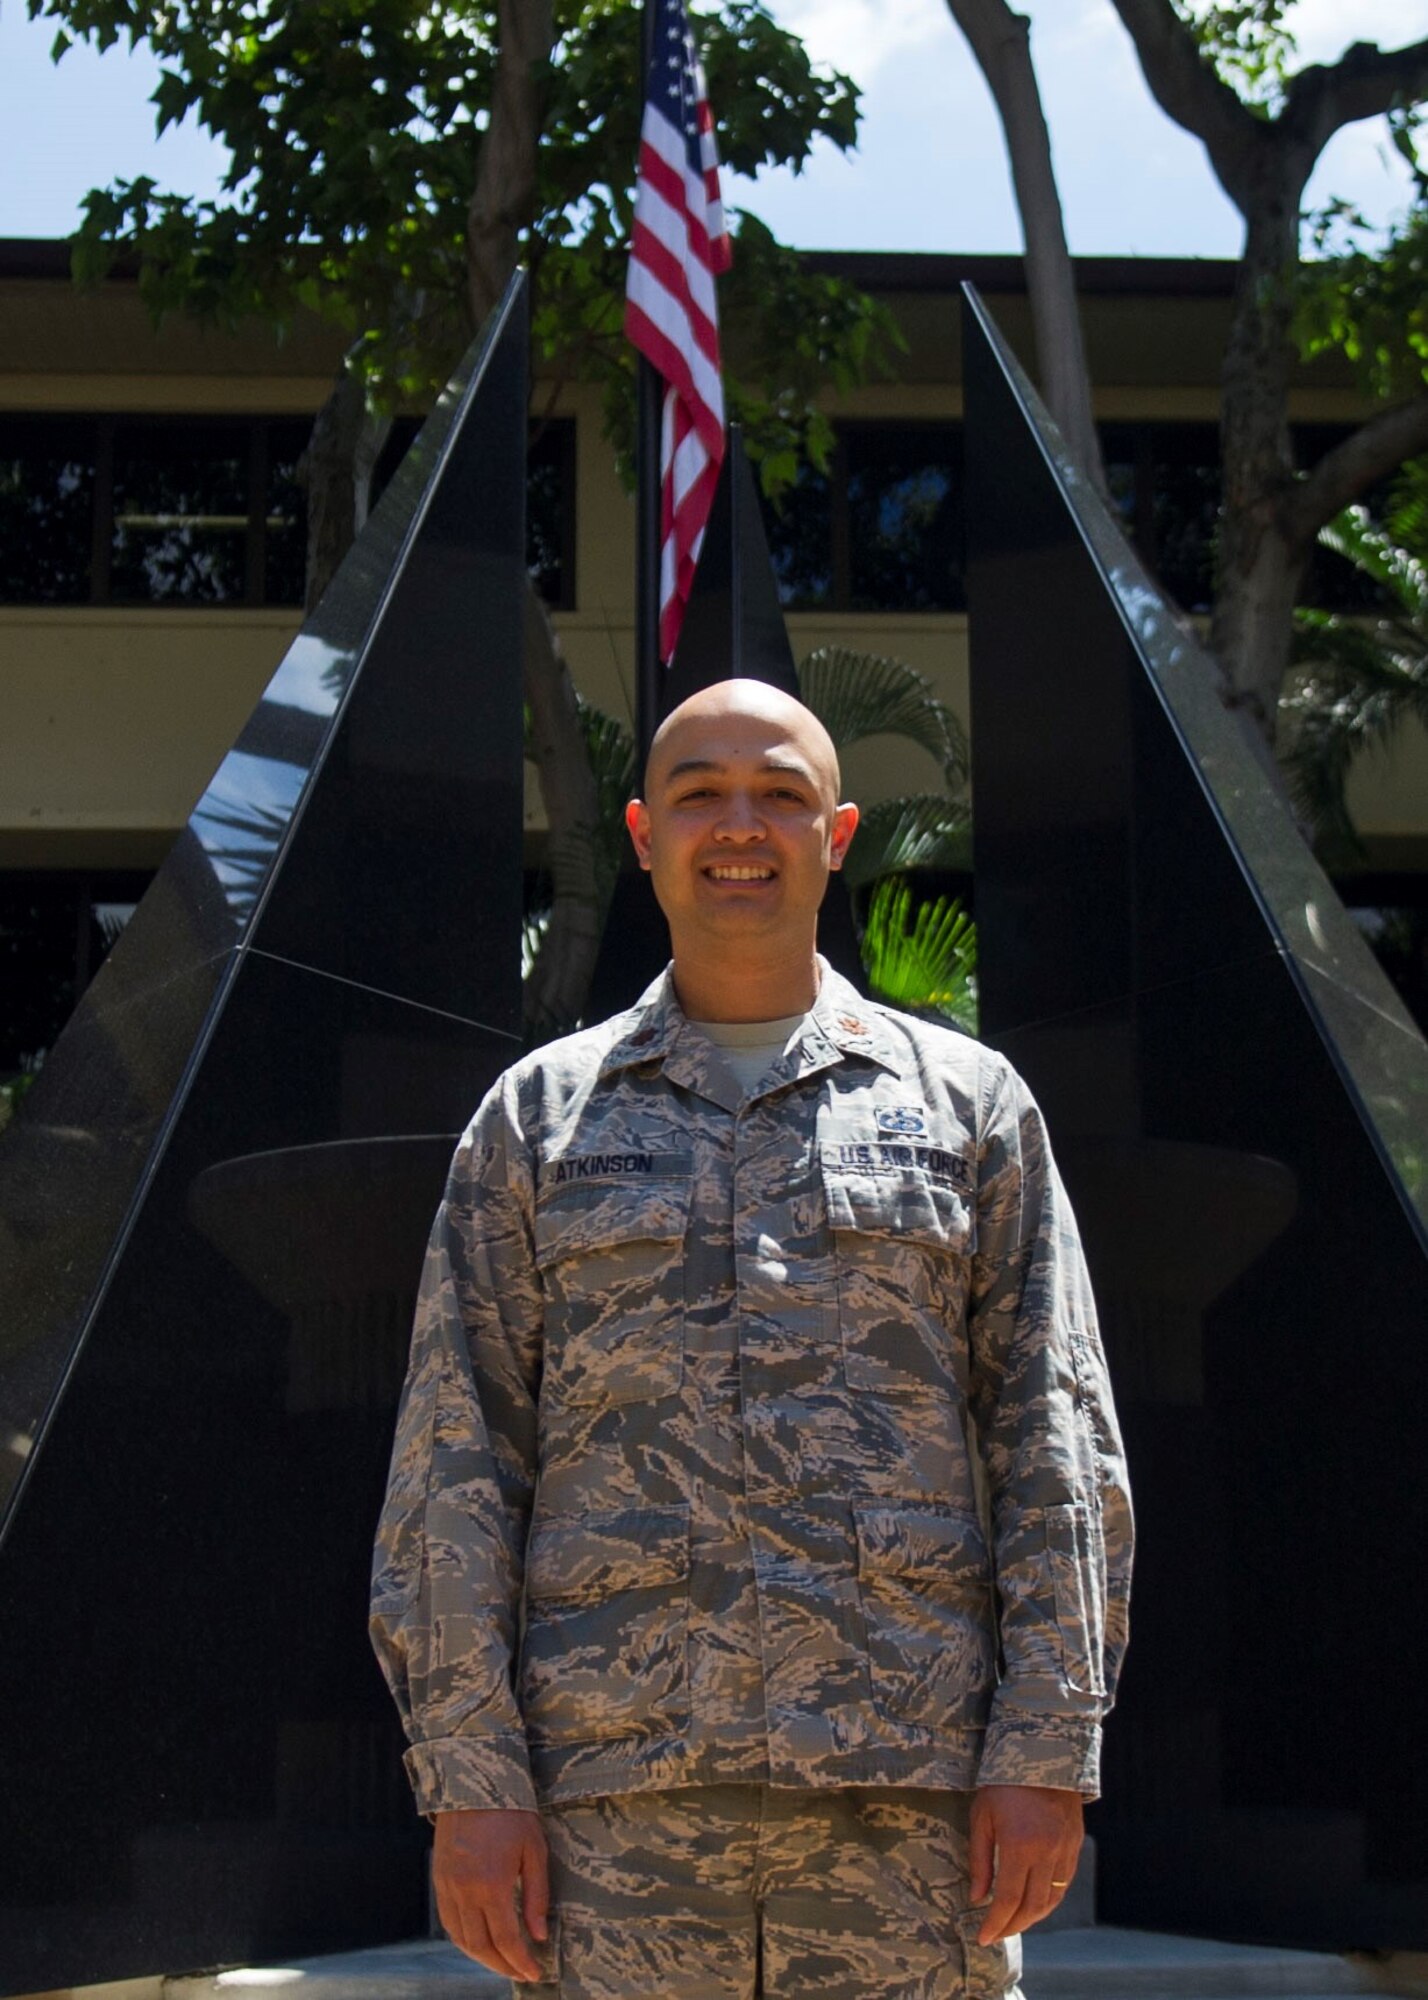 Maj. Andrew Atkinson, Pacific Air Forces Analyses, Assessments, and Lessons Learned branch chief, poses for a photo in the Courtyard of Heroes at Headquarters PACAF, Joint Base Pearl Harbor-Hickam, Hawaii, May 7, 2019. Atkinson was announced as the recipient of the 2019 Military Operations Research Society’s Wayne P. Hughes Junior Analyst of the Year award at the Department of Defense level. (U.S. Air force photo by Staff Sgt. Mikaley Kline)